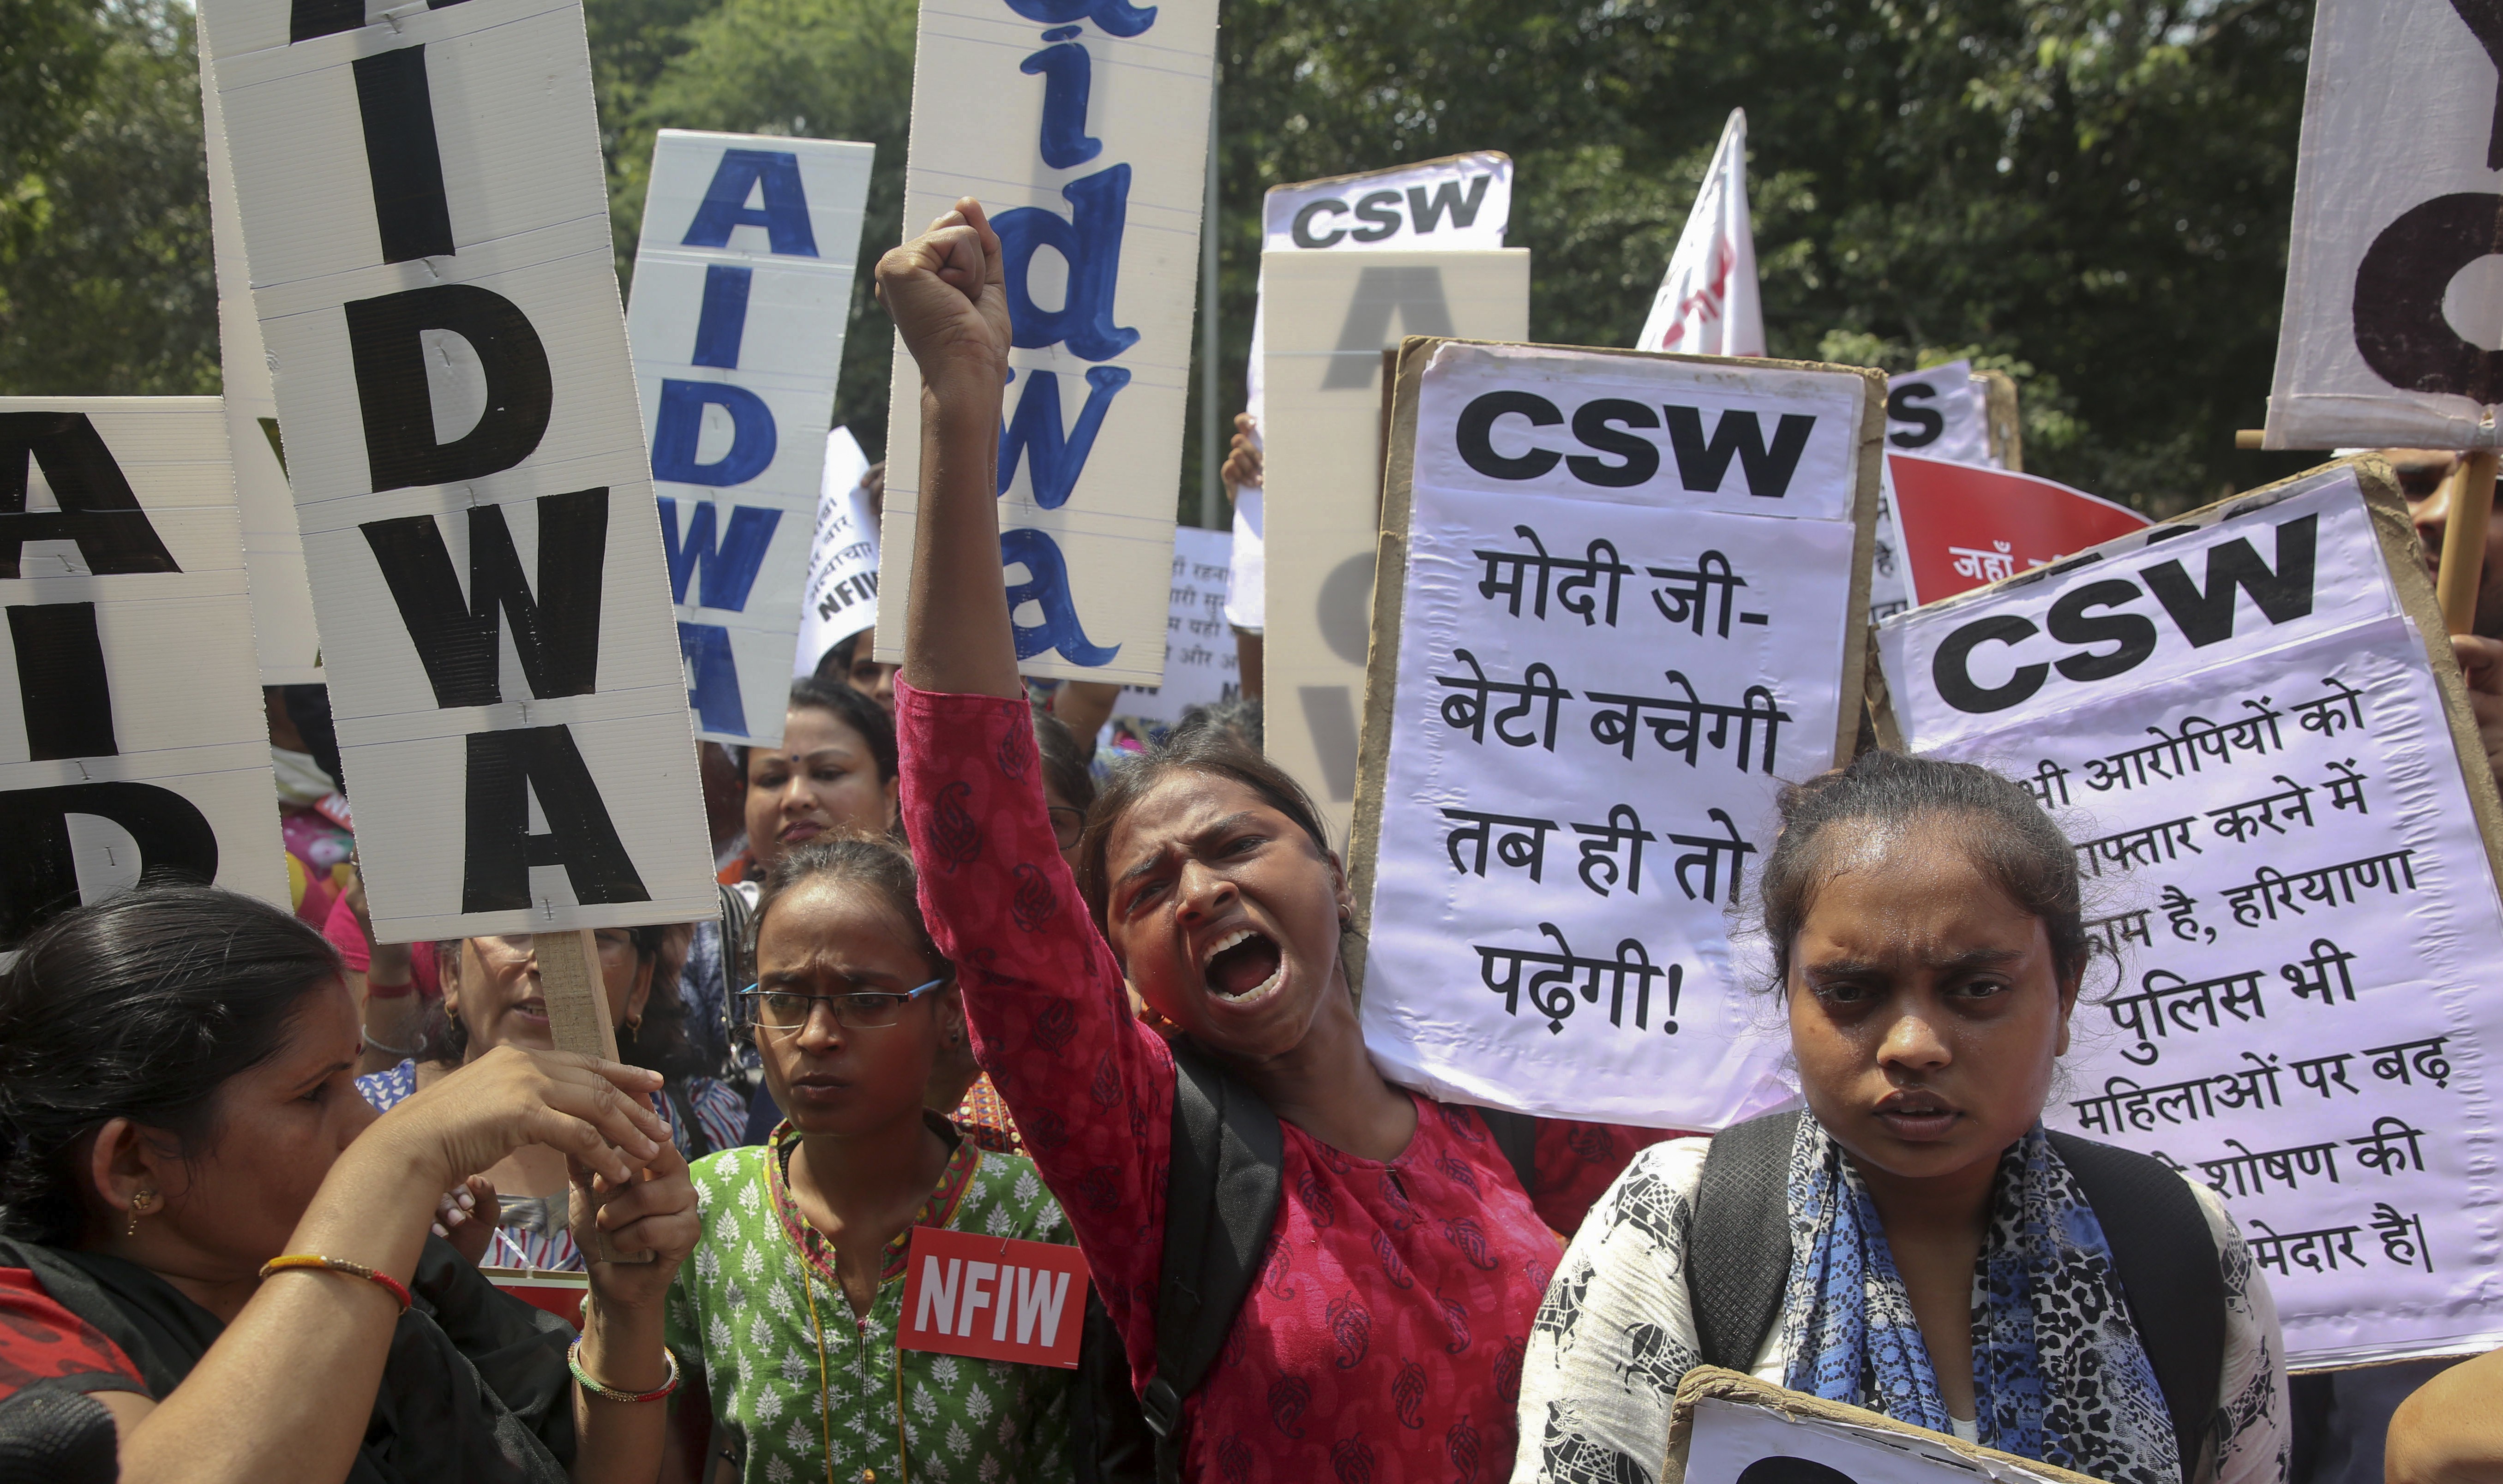 Women activists shout slogans condemning the rape of a nineteen-year old girl while protesting in New Delhi, India, in September. Photo: AP